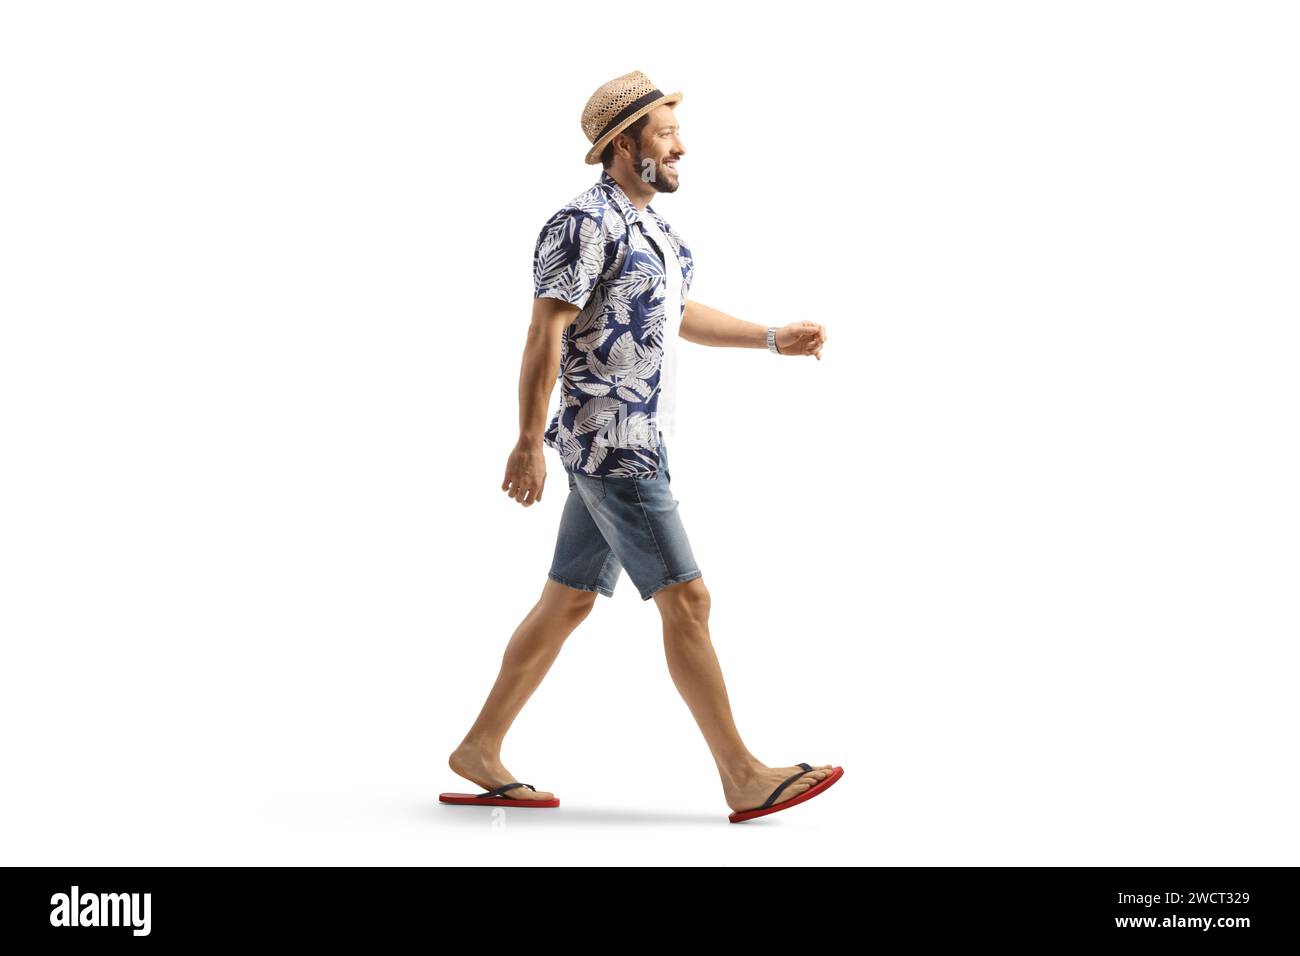 Full length profile shot of a man in flip-flops and straw hat walking isolated on white background Stock Photo